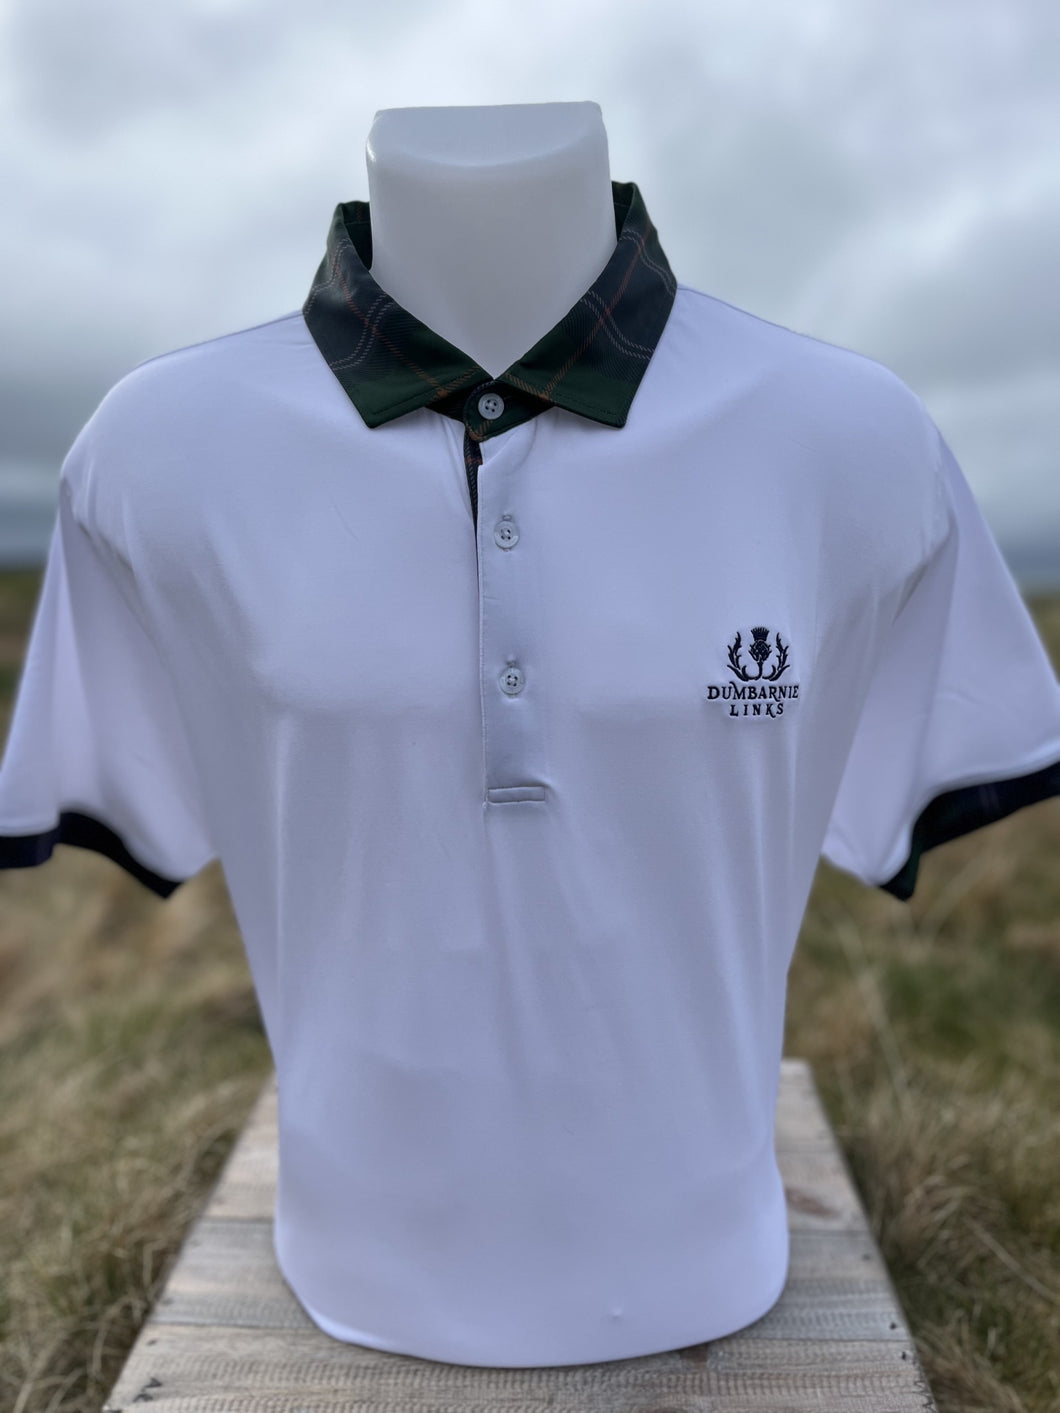 Dumbarnie Collection - Men's Pique Polo W/ Tartan Collar - Mix and Match - 2 for £100!